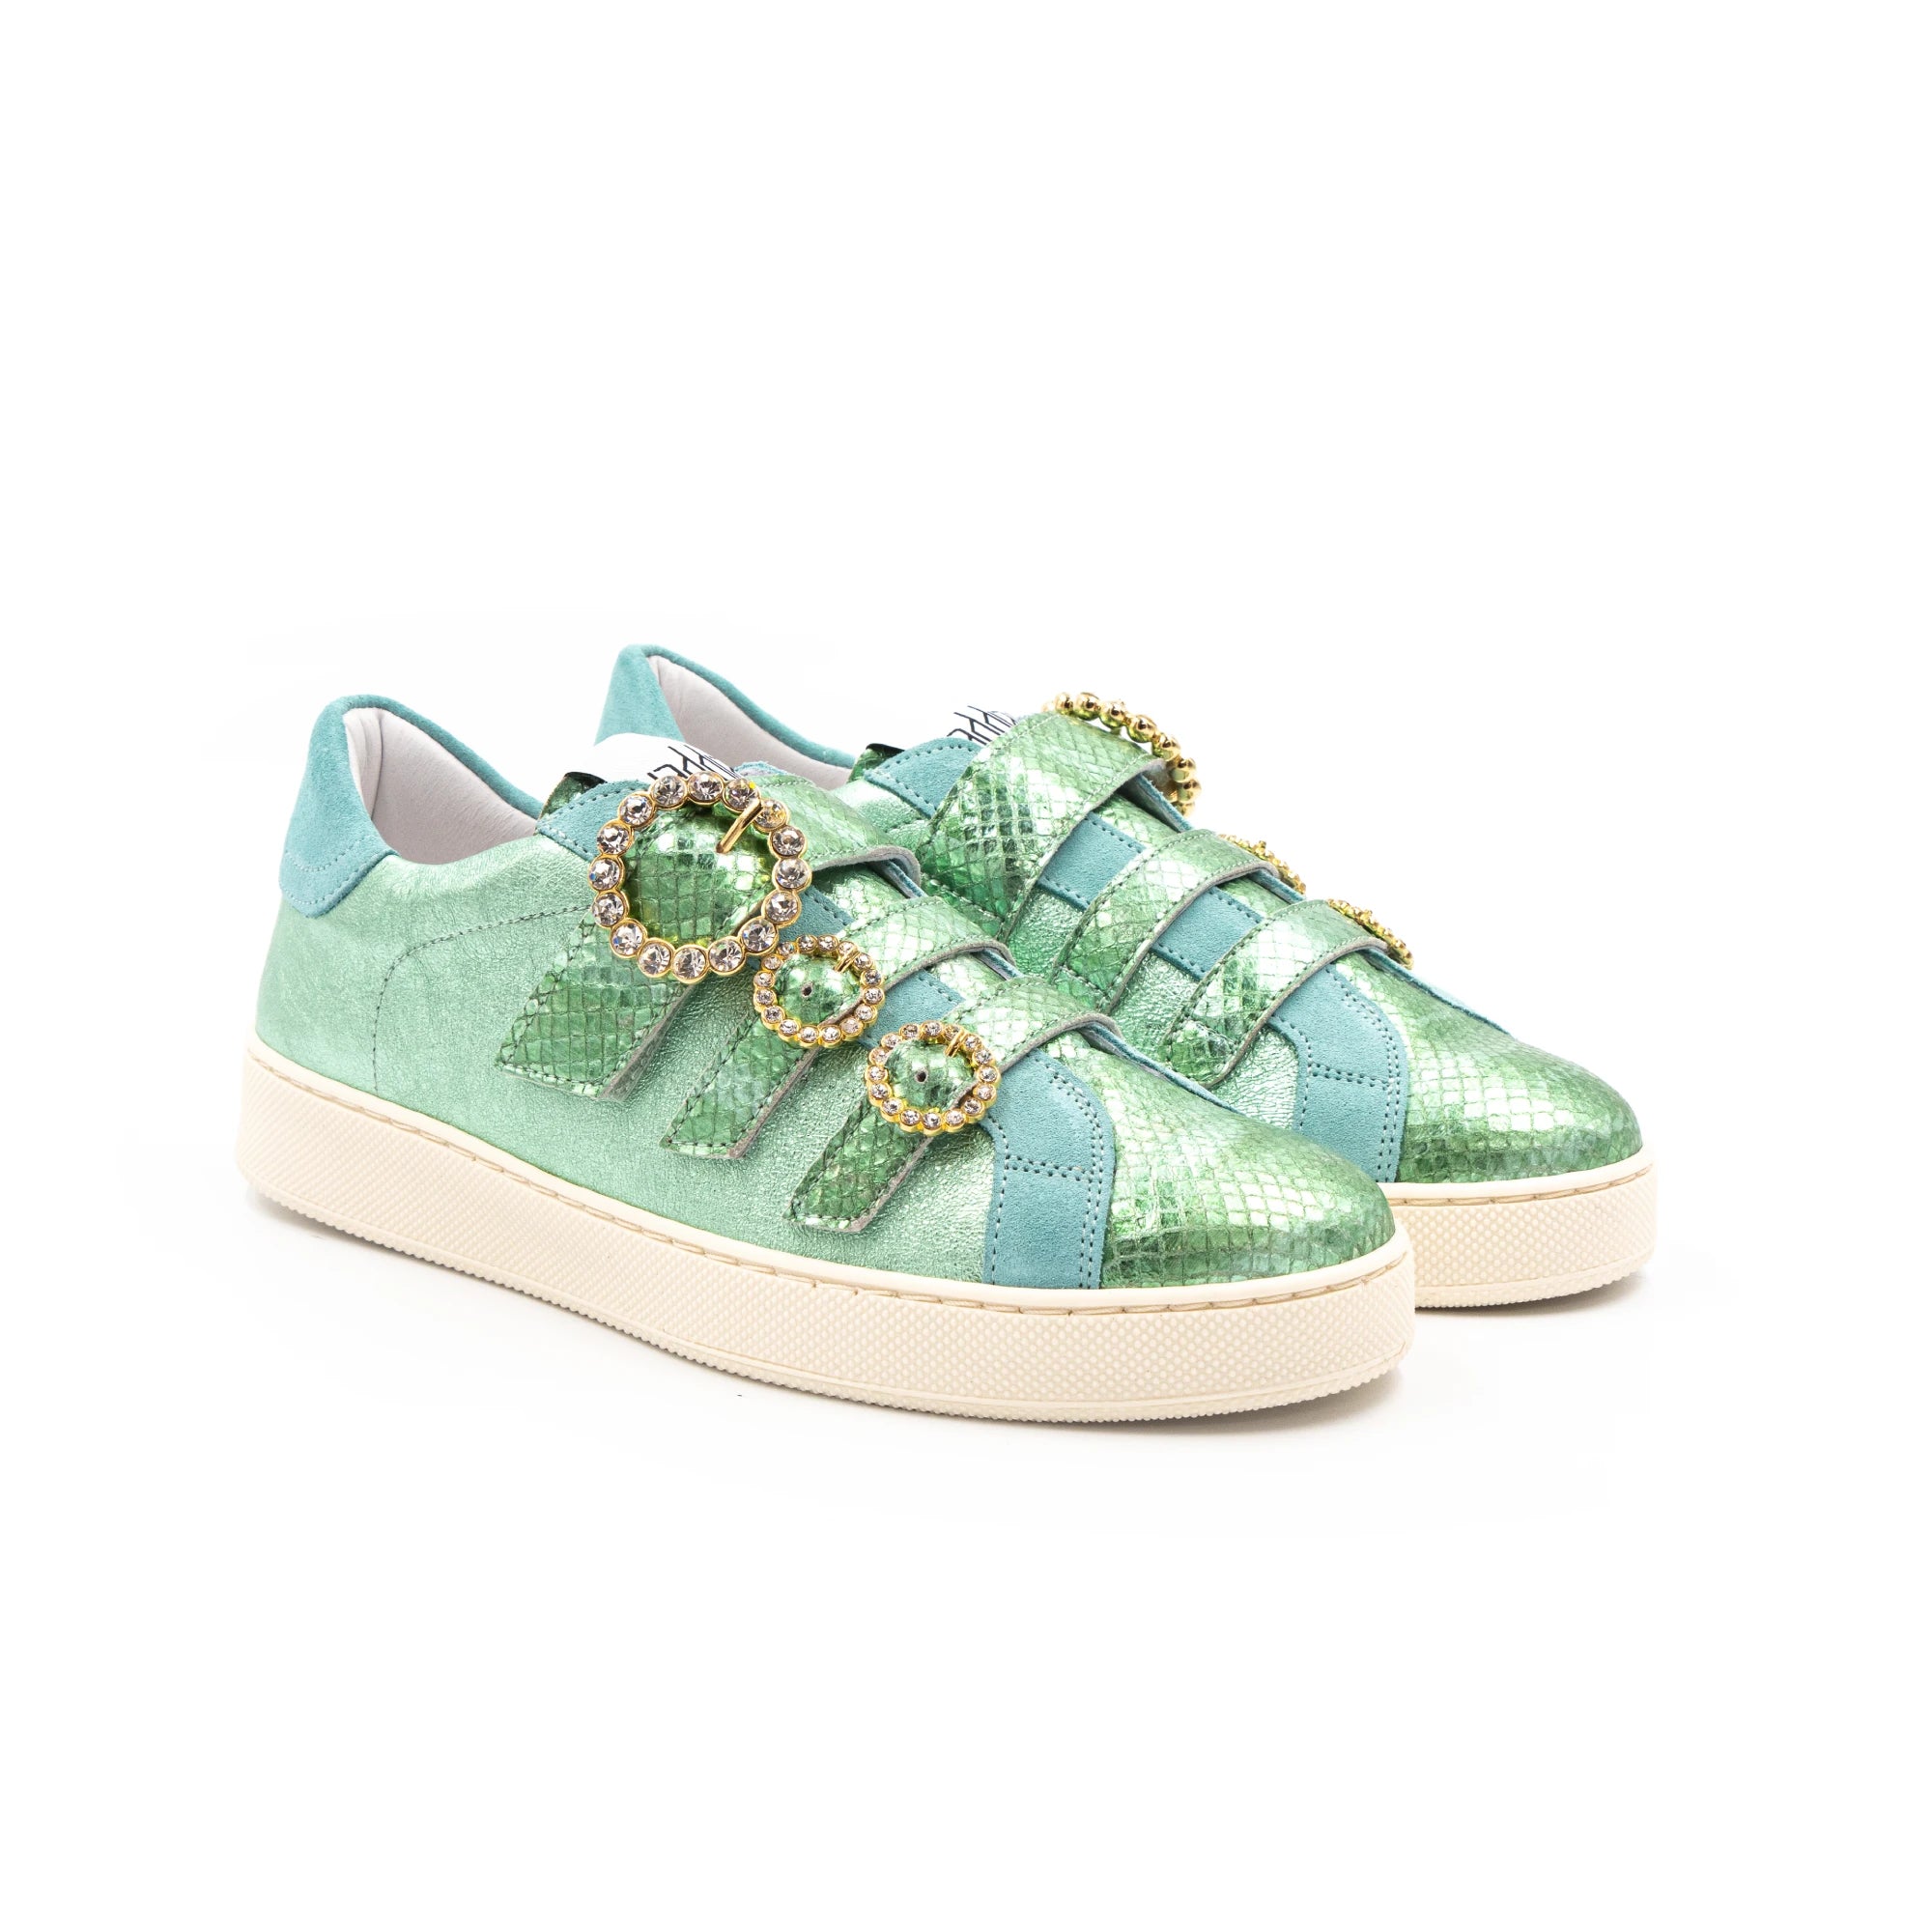 Green-toned sneakers with glittery buckles.